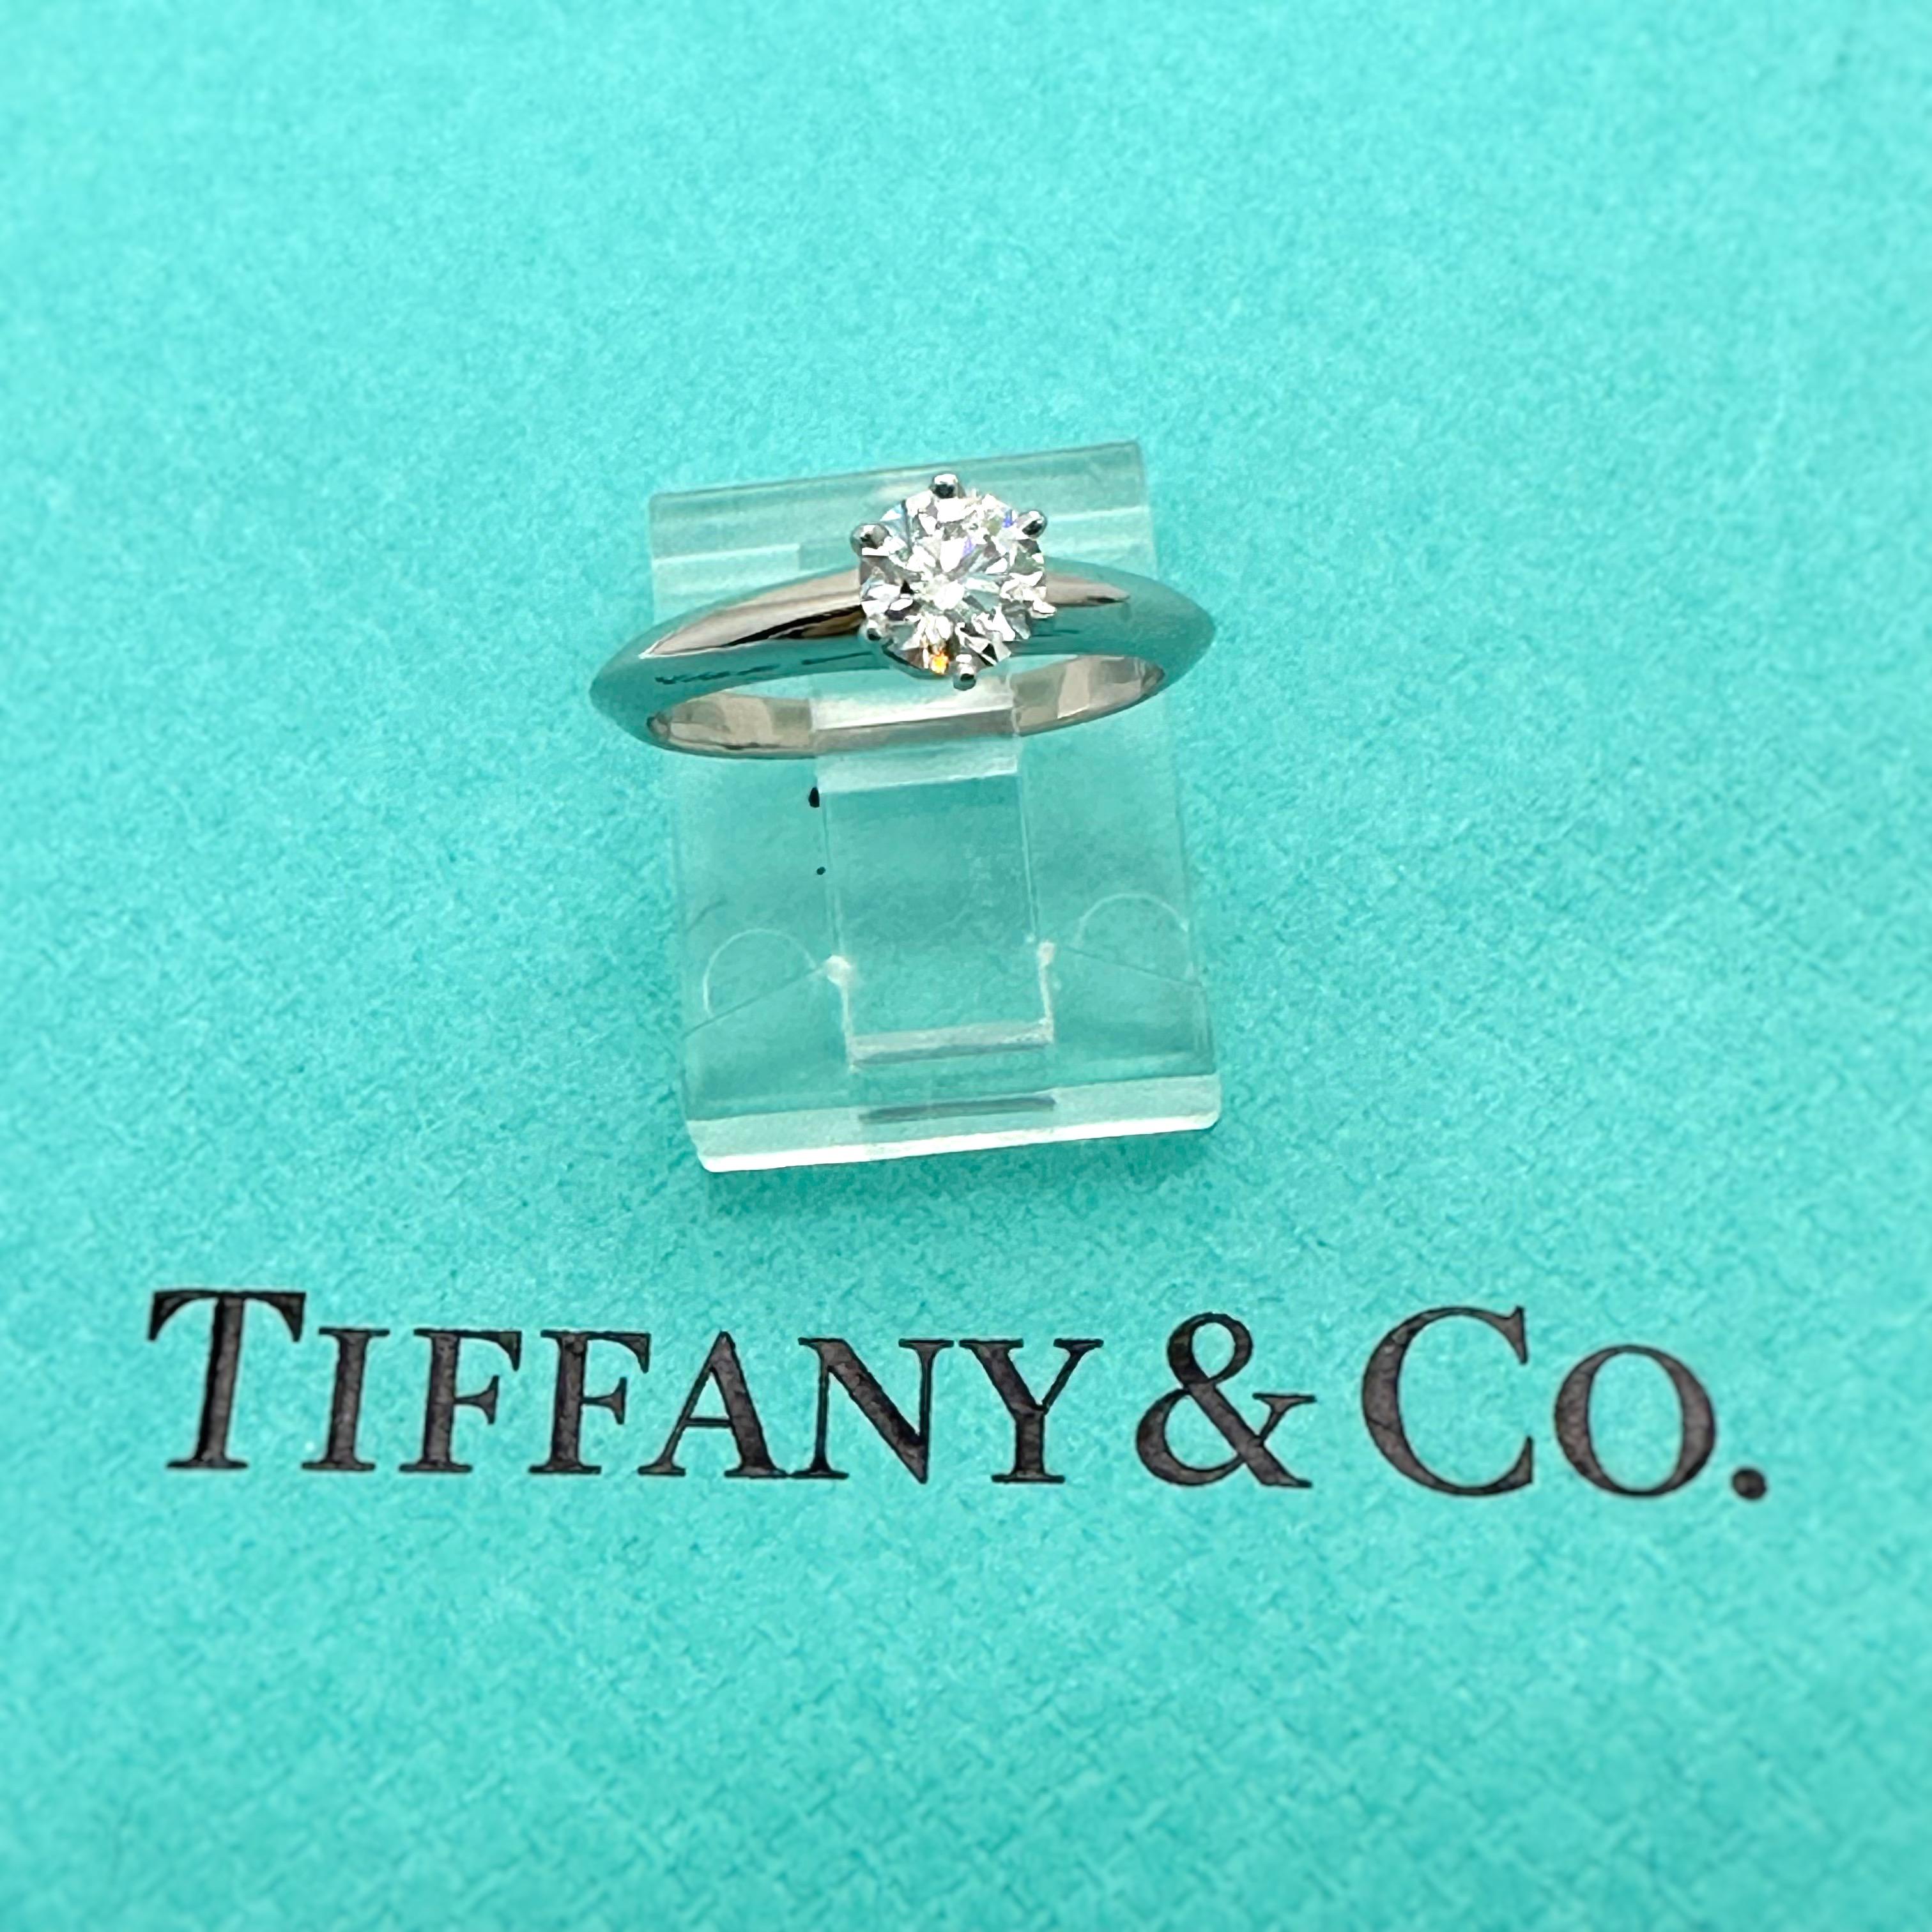 Tiffany & Co Round Brilliant Diamond 0.41 ct E VS1 Solitair Plat Engagement Ring For Sale 6